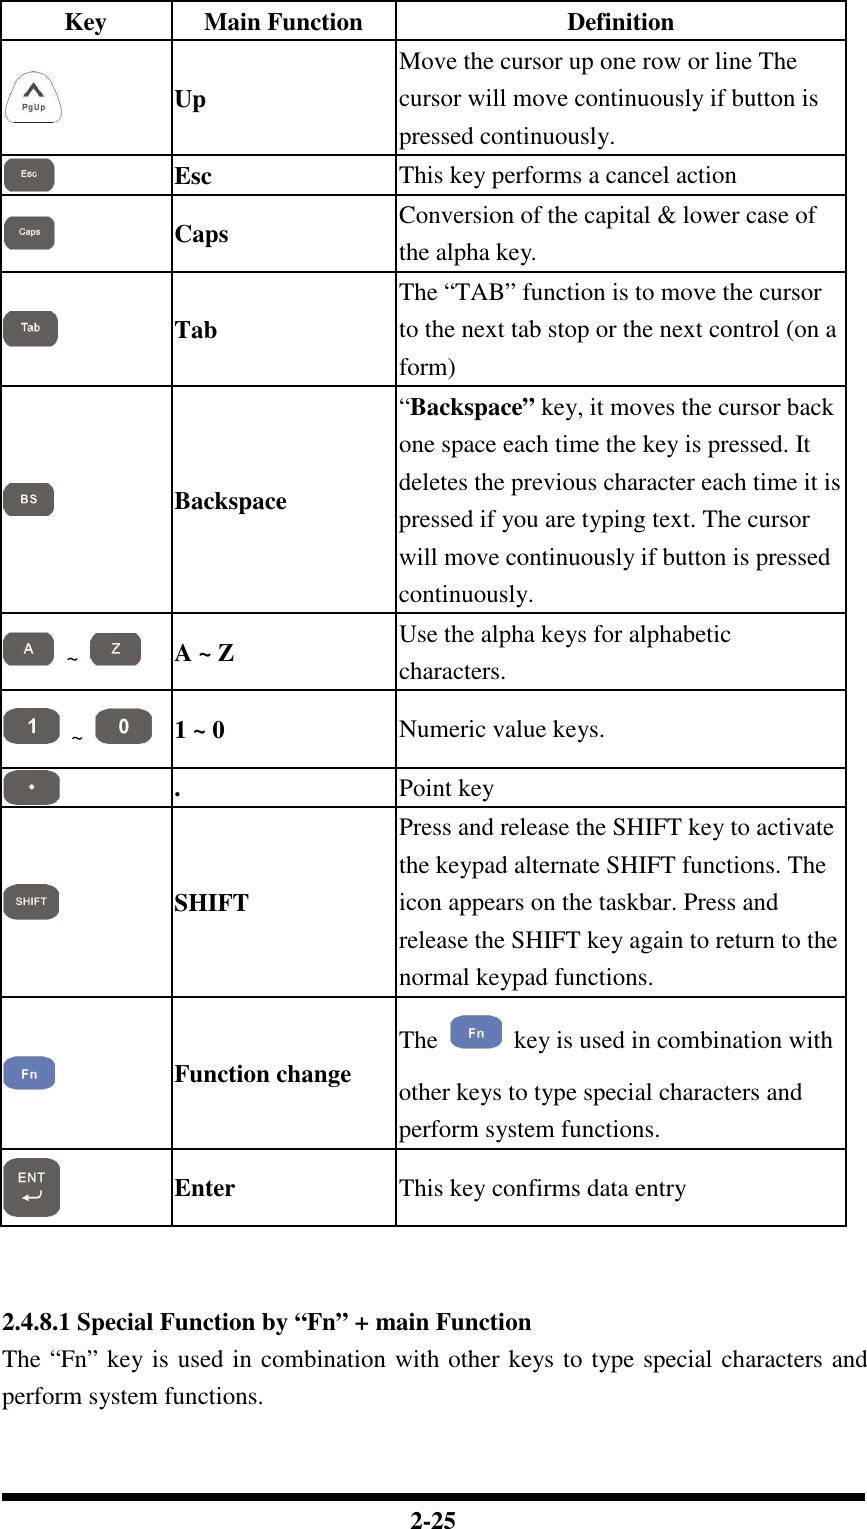  2-25 Key  Main Function  Definition  Up Move the cursor up one row or line The cursor will move continuously if button is pressed continuously.  Esc  This key performs a cancel action  Caps  Conversion of the capital &amp; lower case of the alpha key.  Tab The “TAB” function is to move the cursor to the next tab stop or the next control (on a form)  Backspace “Backspace” key, it moves the cursor back one space each time the key is pressed. It deletes the previous character each time it is pressed if you are typing text. The cursor will move continuously if button is pressed continuously.   ~   A ~ Z  Use the alpha keys for alphabetic characters.   ~   1 ~ 0  Numeric value keys.  .  Point key  SHIFT Press and release the SHIFT key to activate the keypad alternate SHIFT functions. The icon appears on the taskbar. Press and release the SHIFT key again to return to the normal keypad functions.  Function change The    key is used in combination with other keys to type special characters and perform system functions.  Enter  This key confirms data entry   2.4.8.1 Special Function by “Fn” + main Function The “Fn” key is used in combination with other keys to type special characters and perform system functions.  